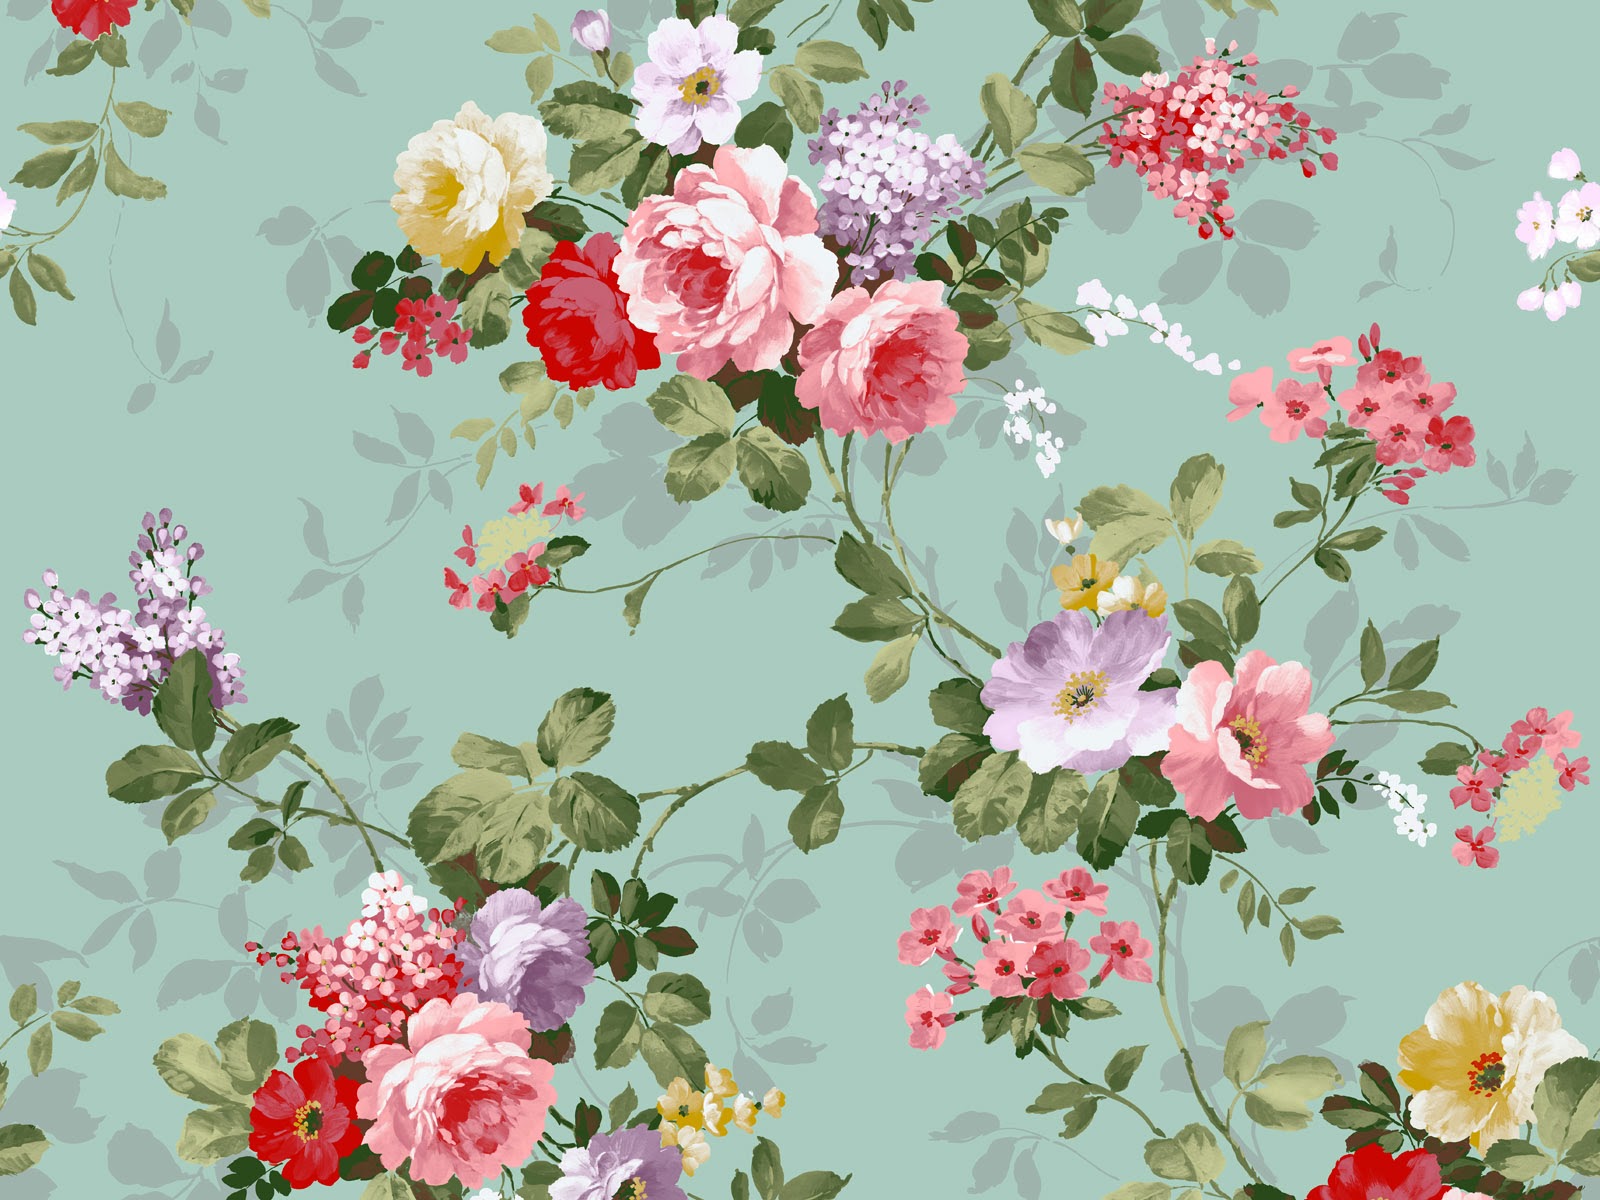 Vintage Flower Background Wallpapers WIN10 THEMES